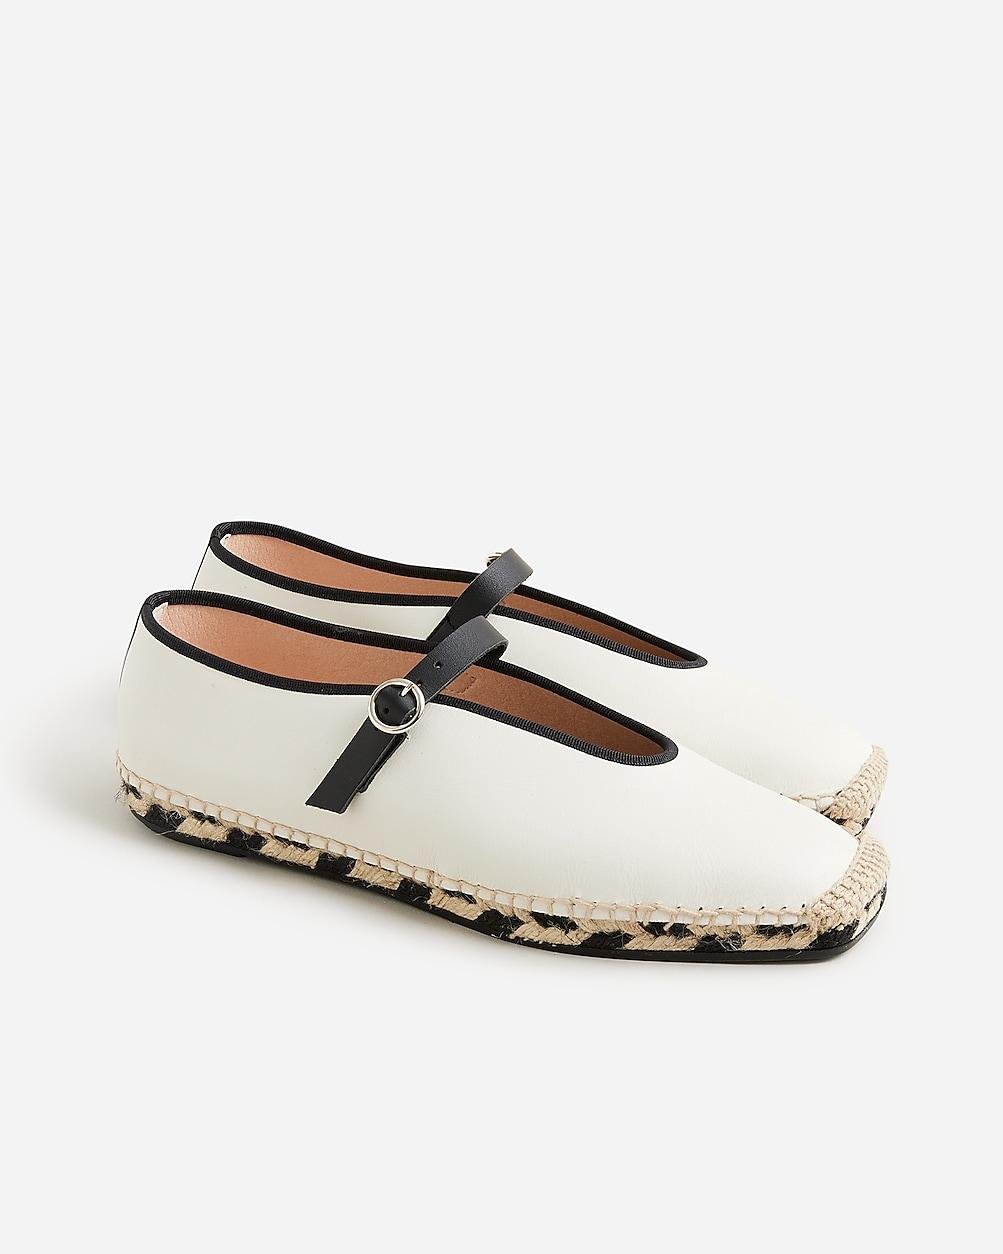 Made-in-Spain Mary Jane espadrilles in leather by J.CREW